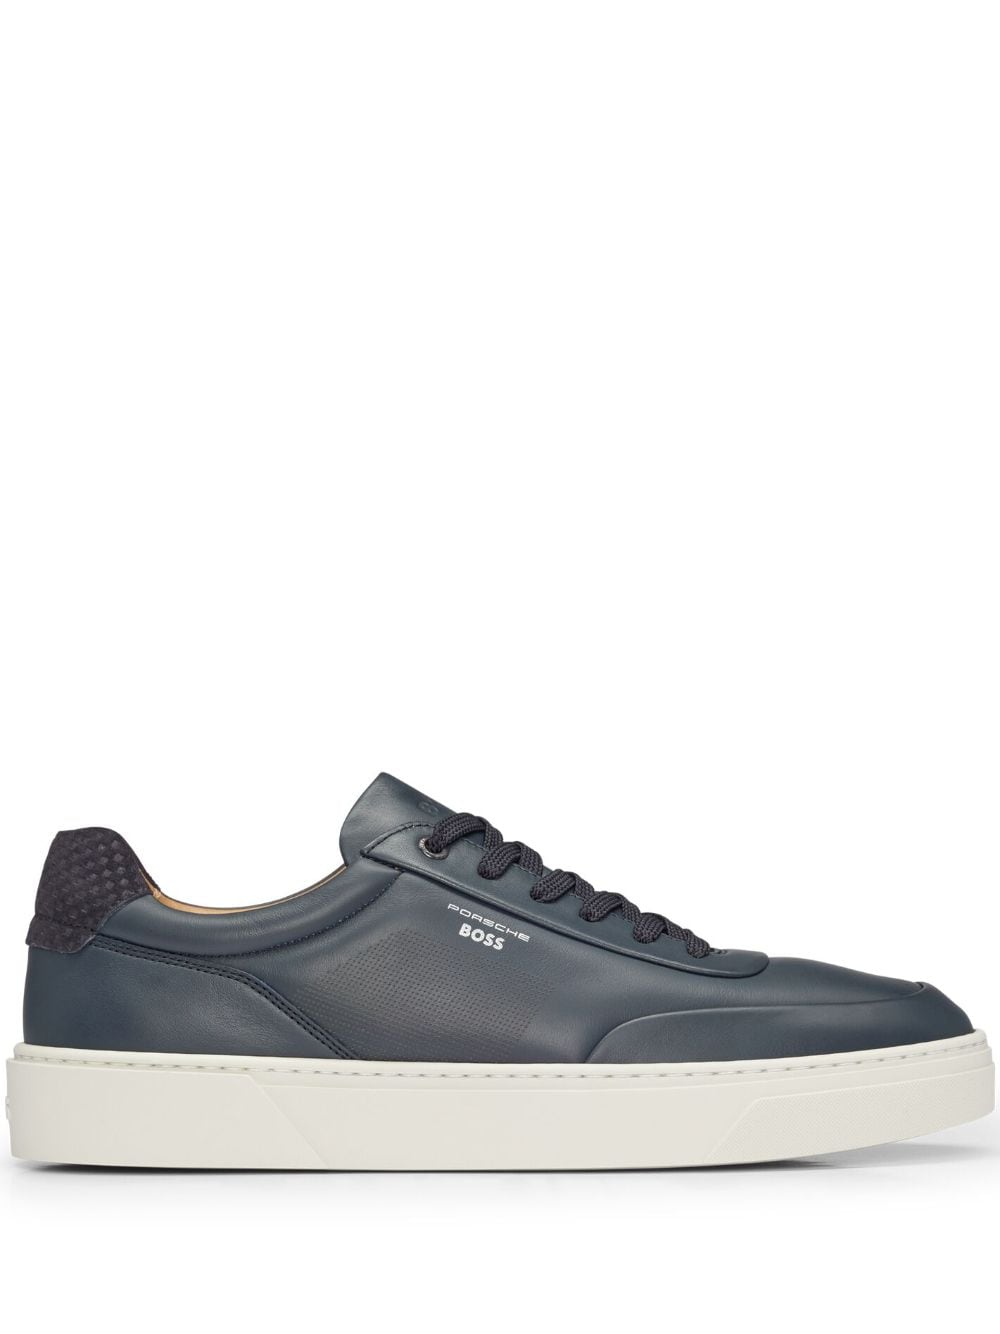 BOSS x Porsche perforated leather sneakers - Blue von BOSS